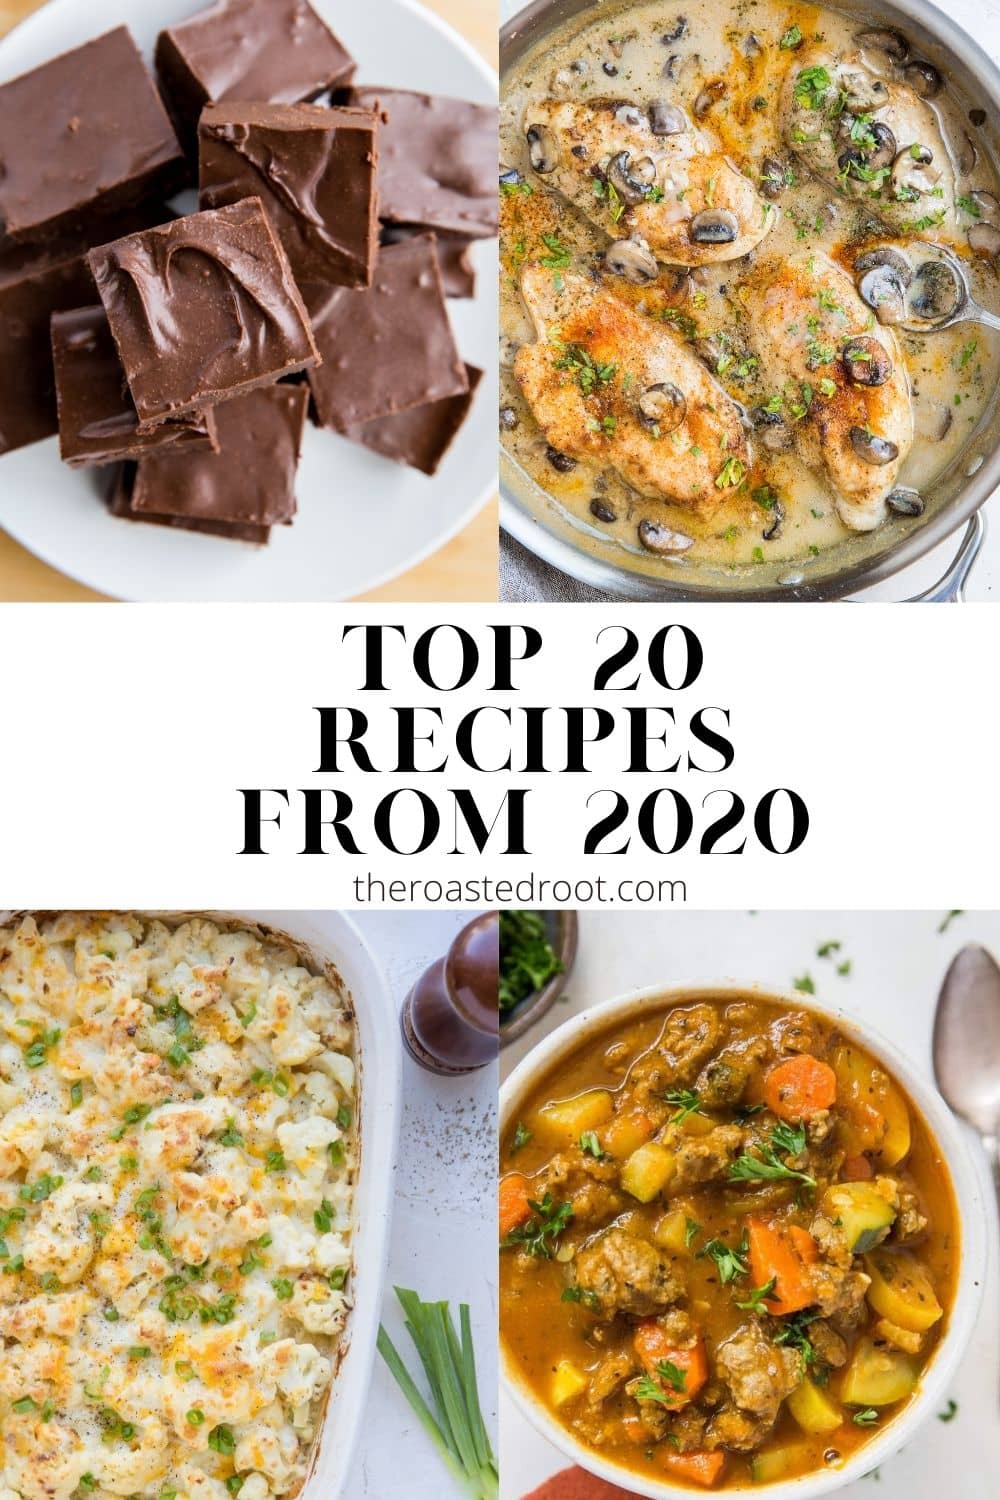 Top 20 Recipes from 2020 on theroastedroot.com